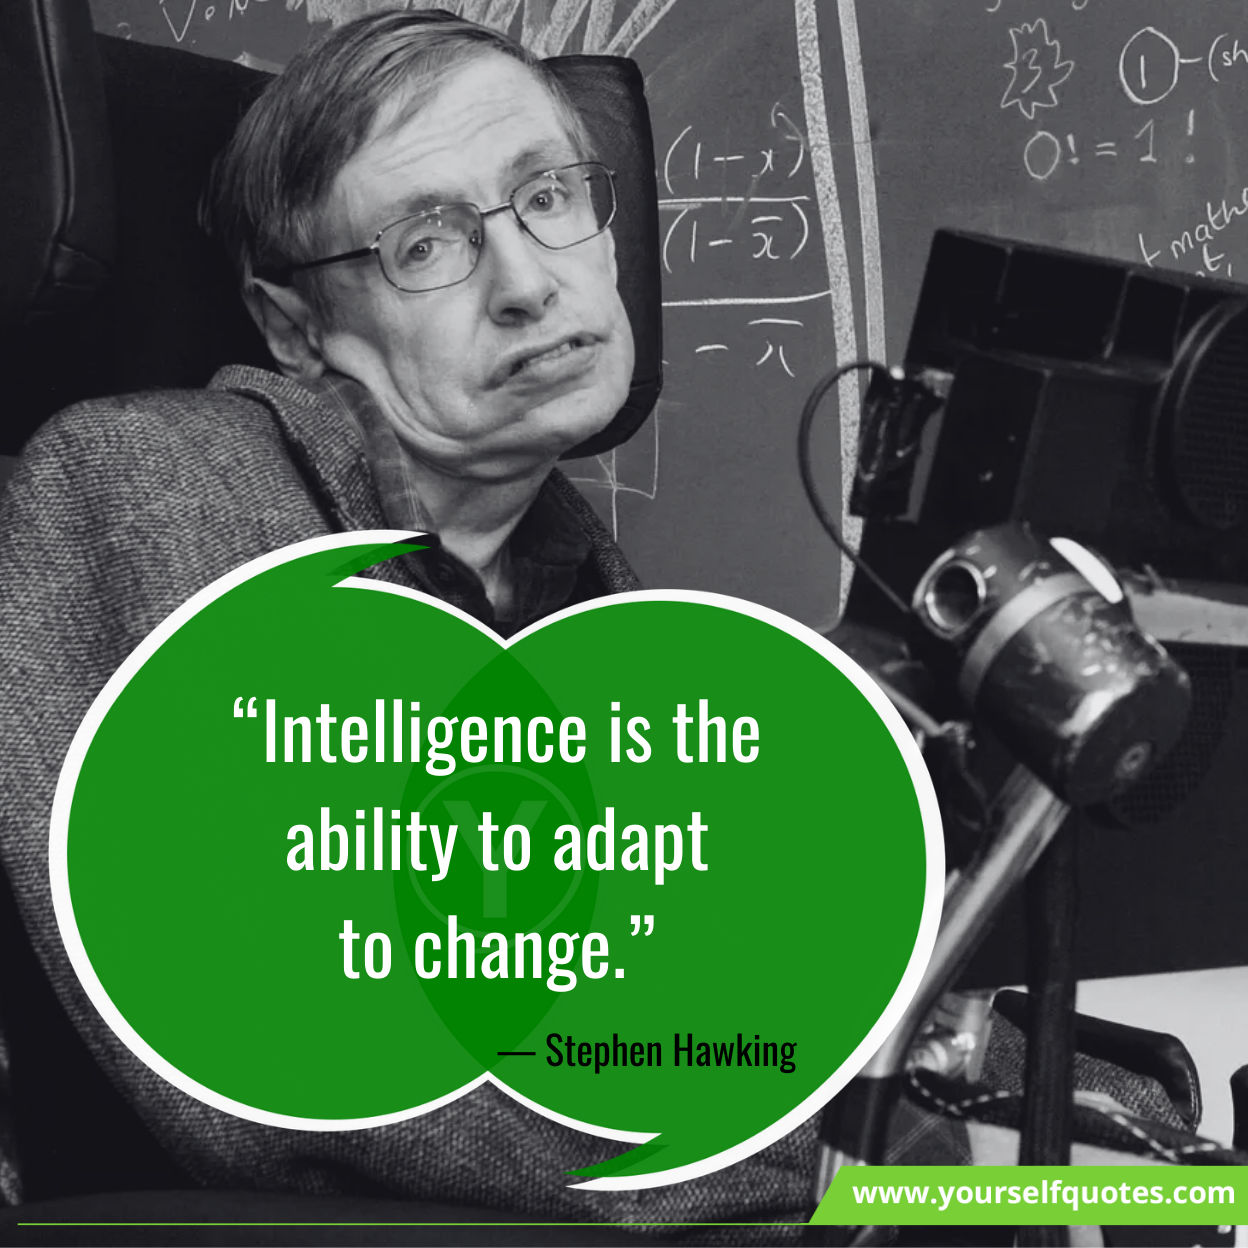 Stephen Hawking Quotes Images